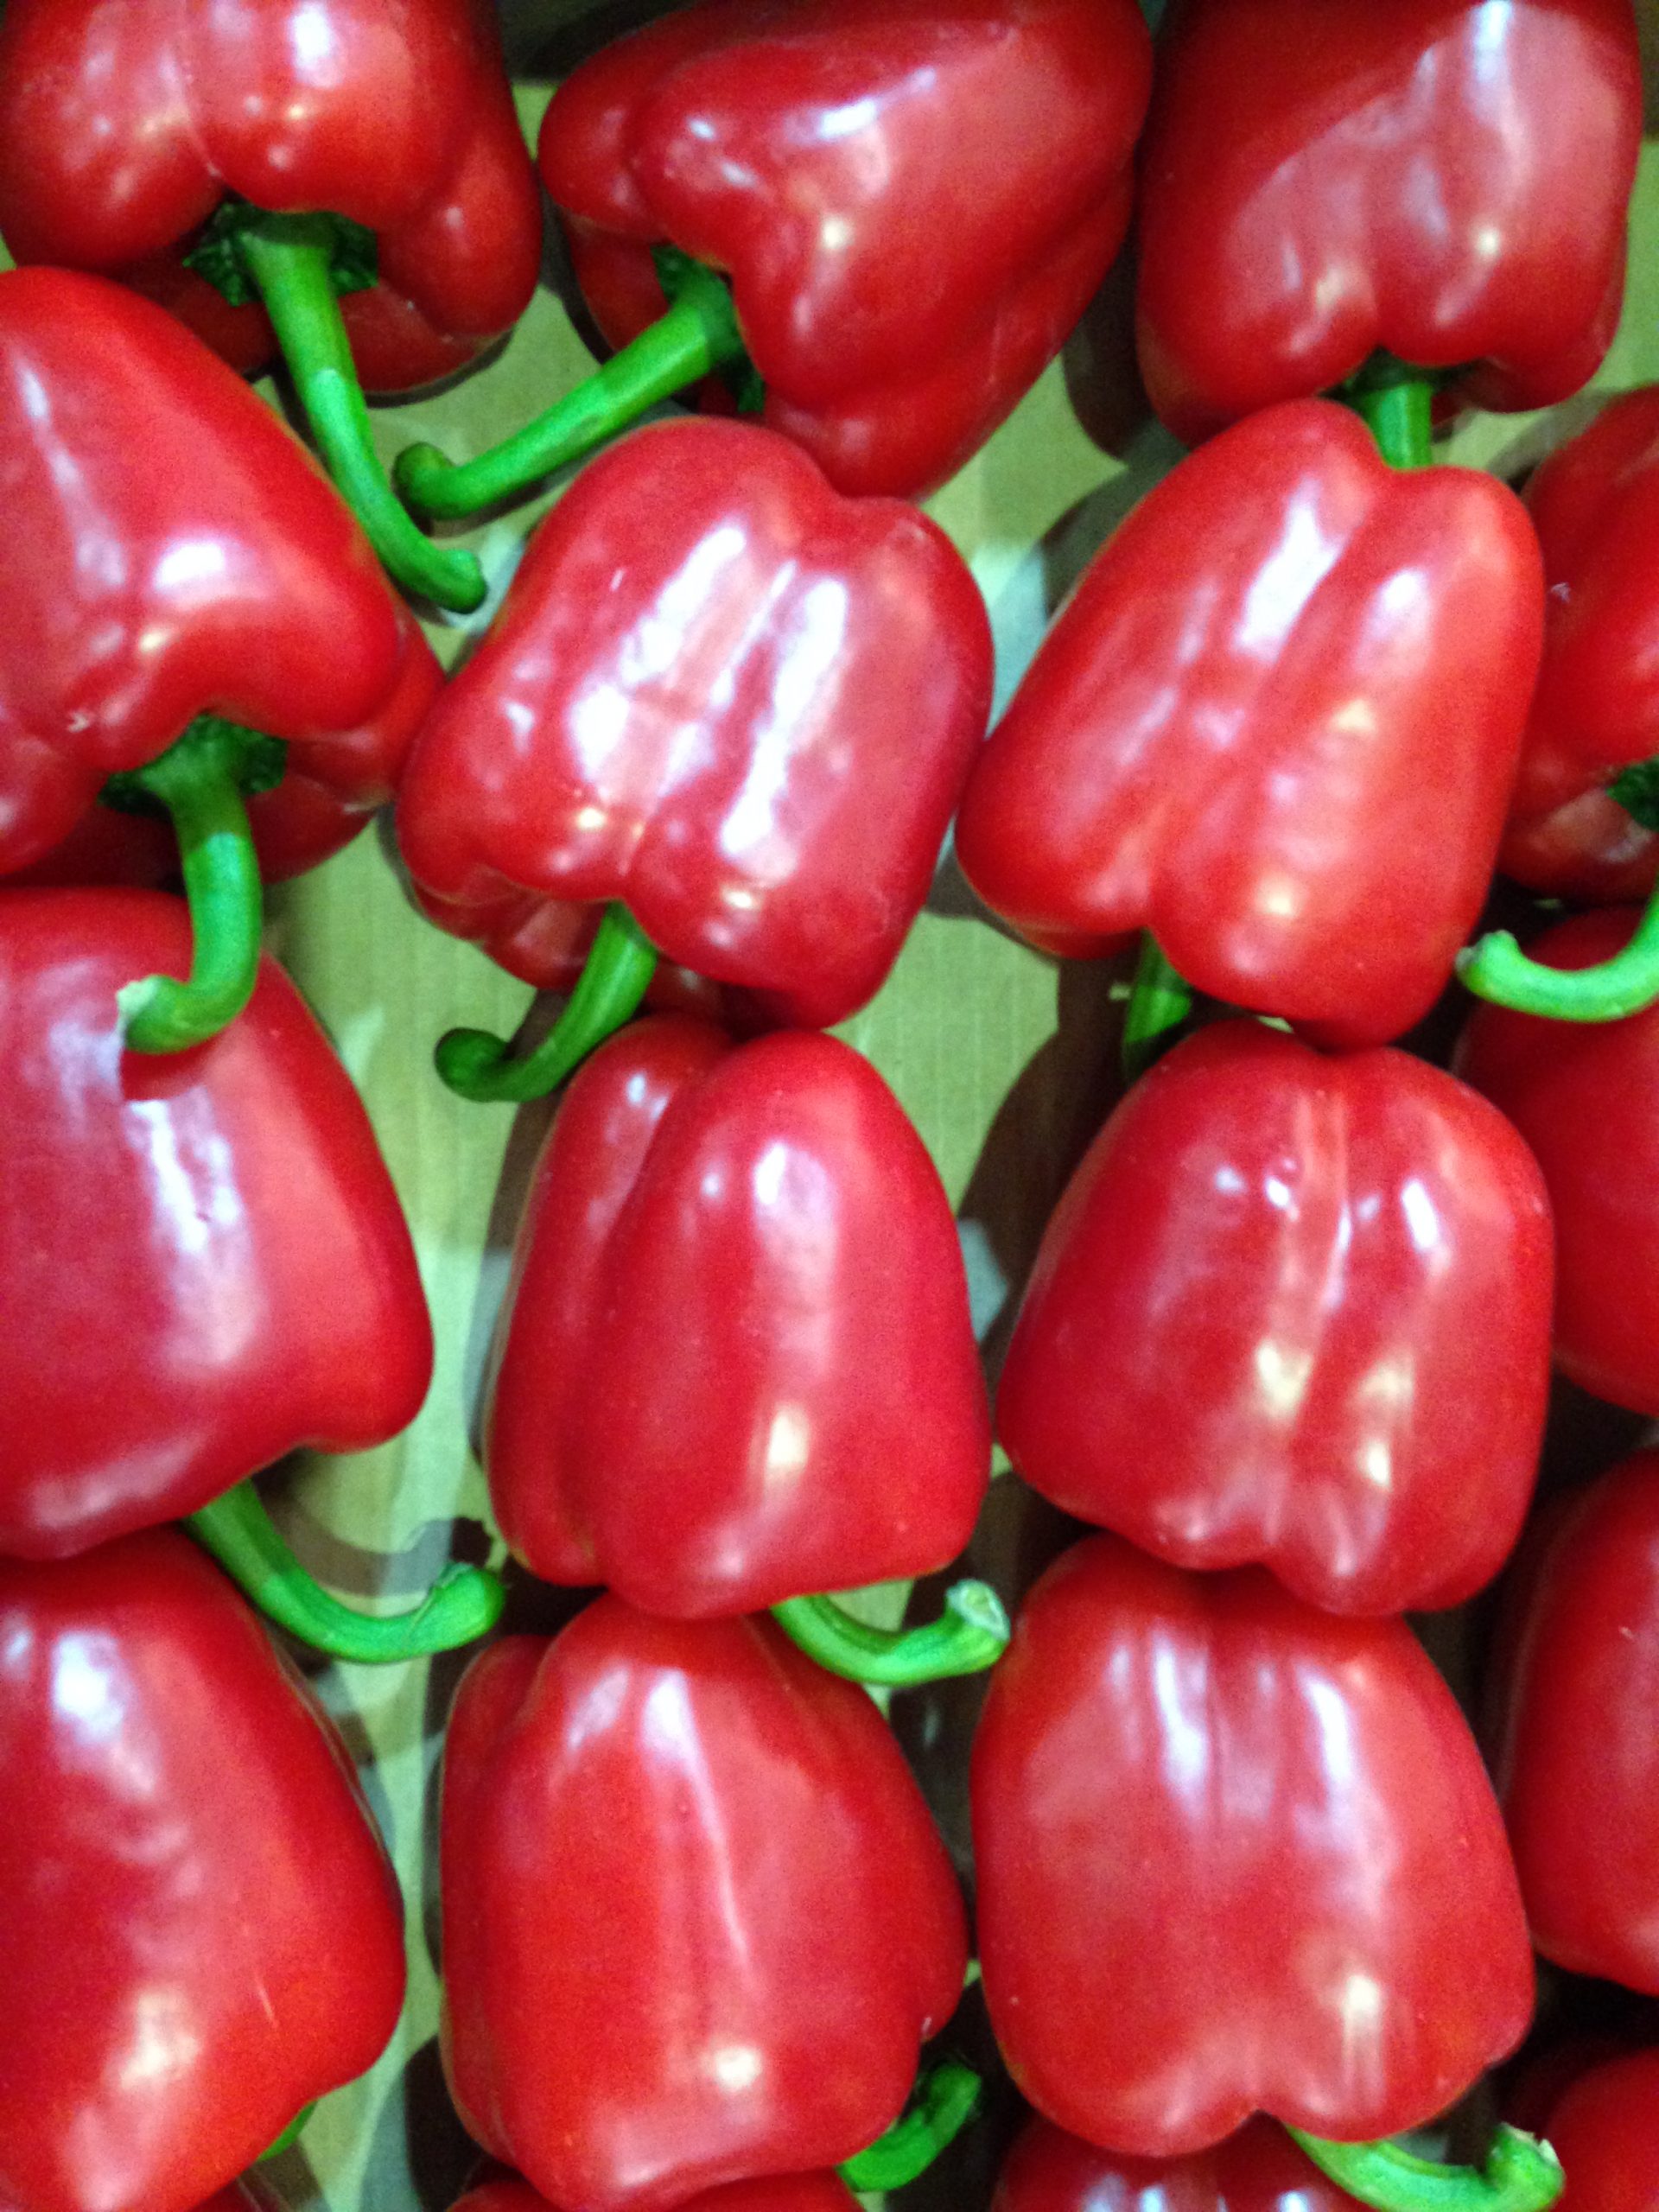 Sweet red peppers are among the vegetables rich in the vitamin A precursor β-carotene